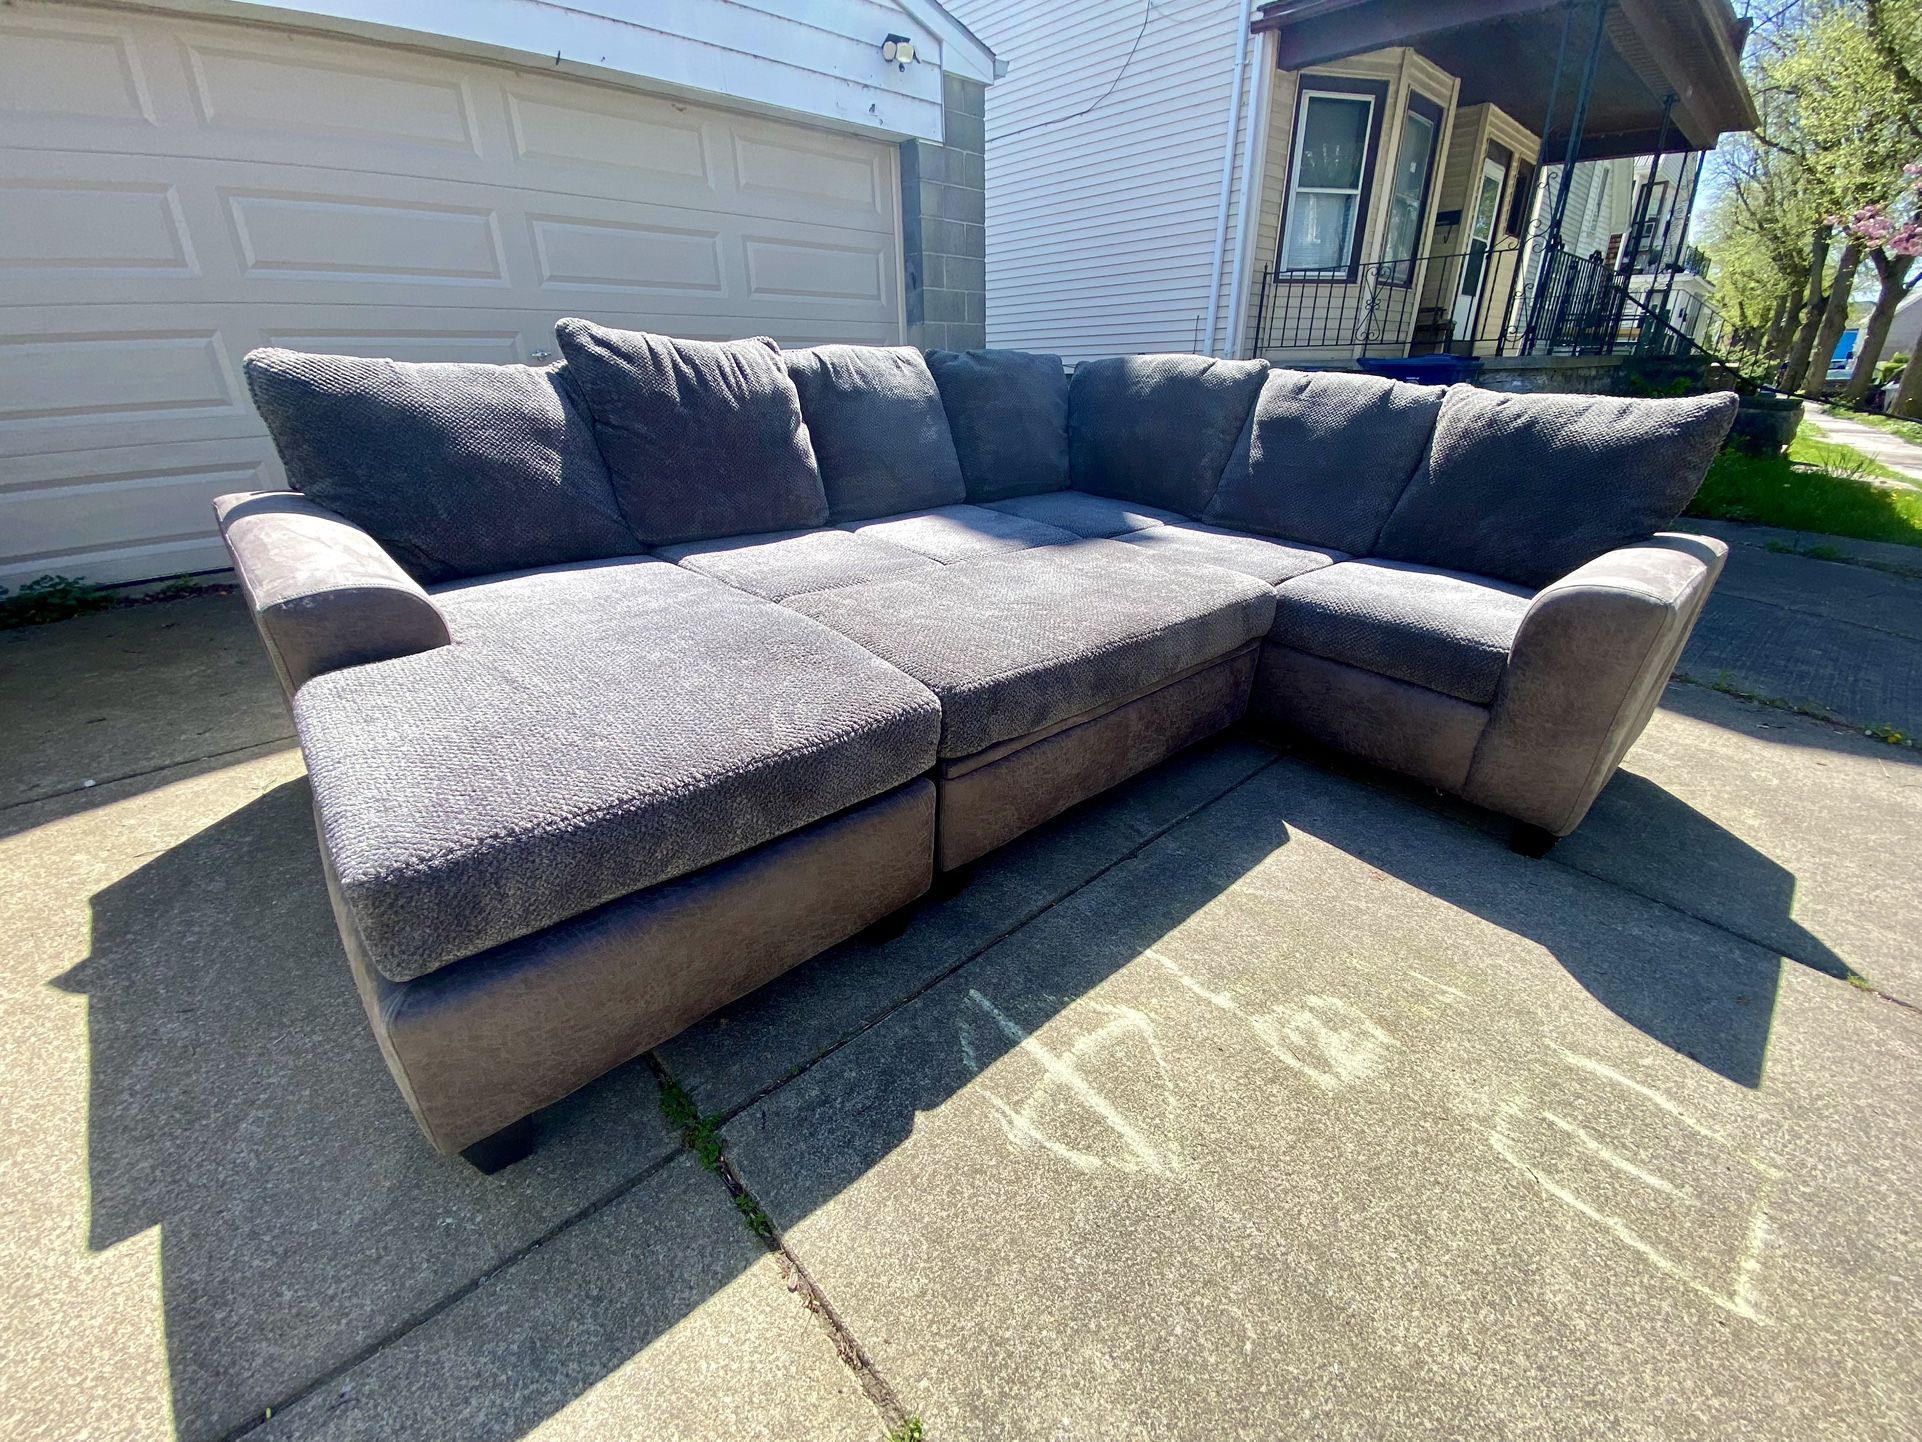 Couches/Sectionals/Sets(Free Local Delivery)